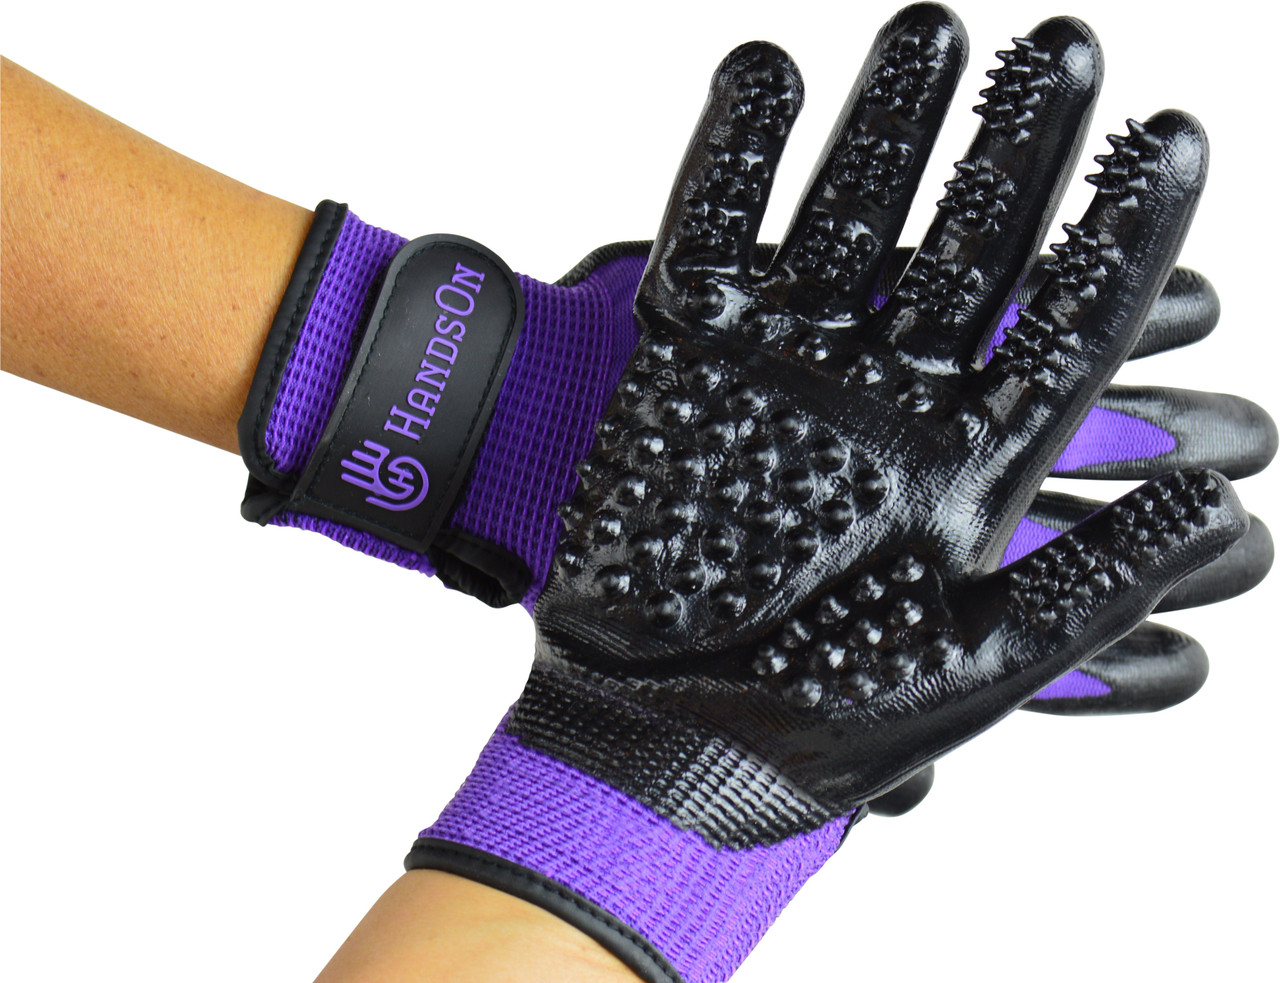 hands on grooming gloves